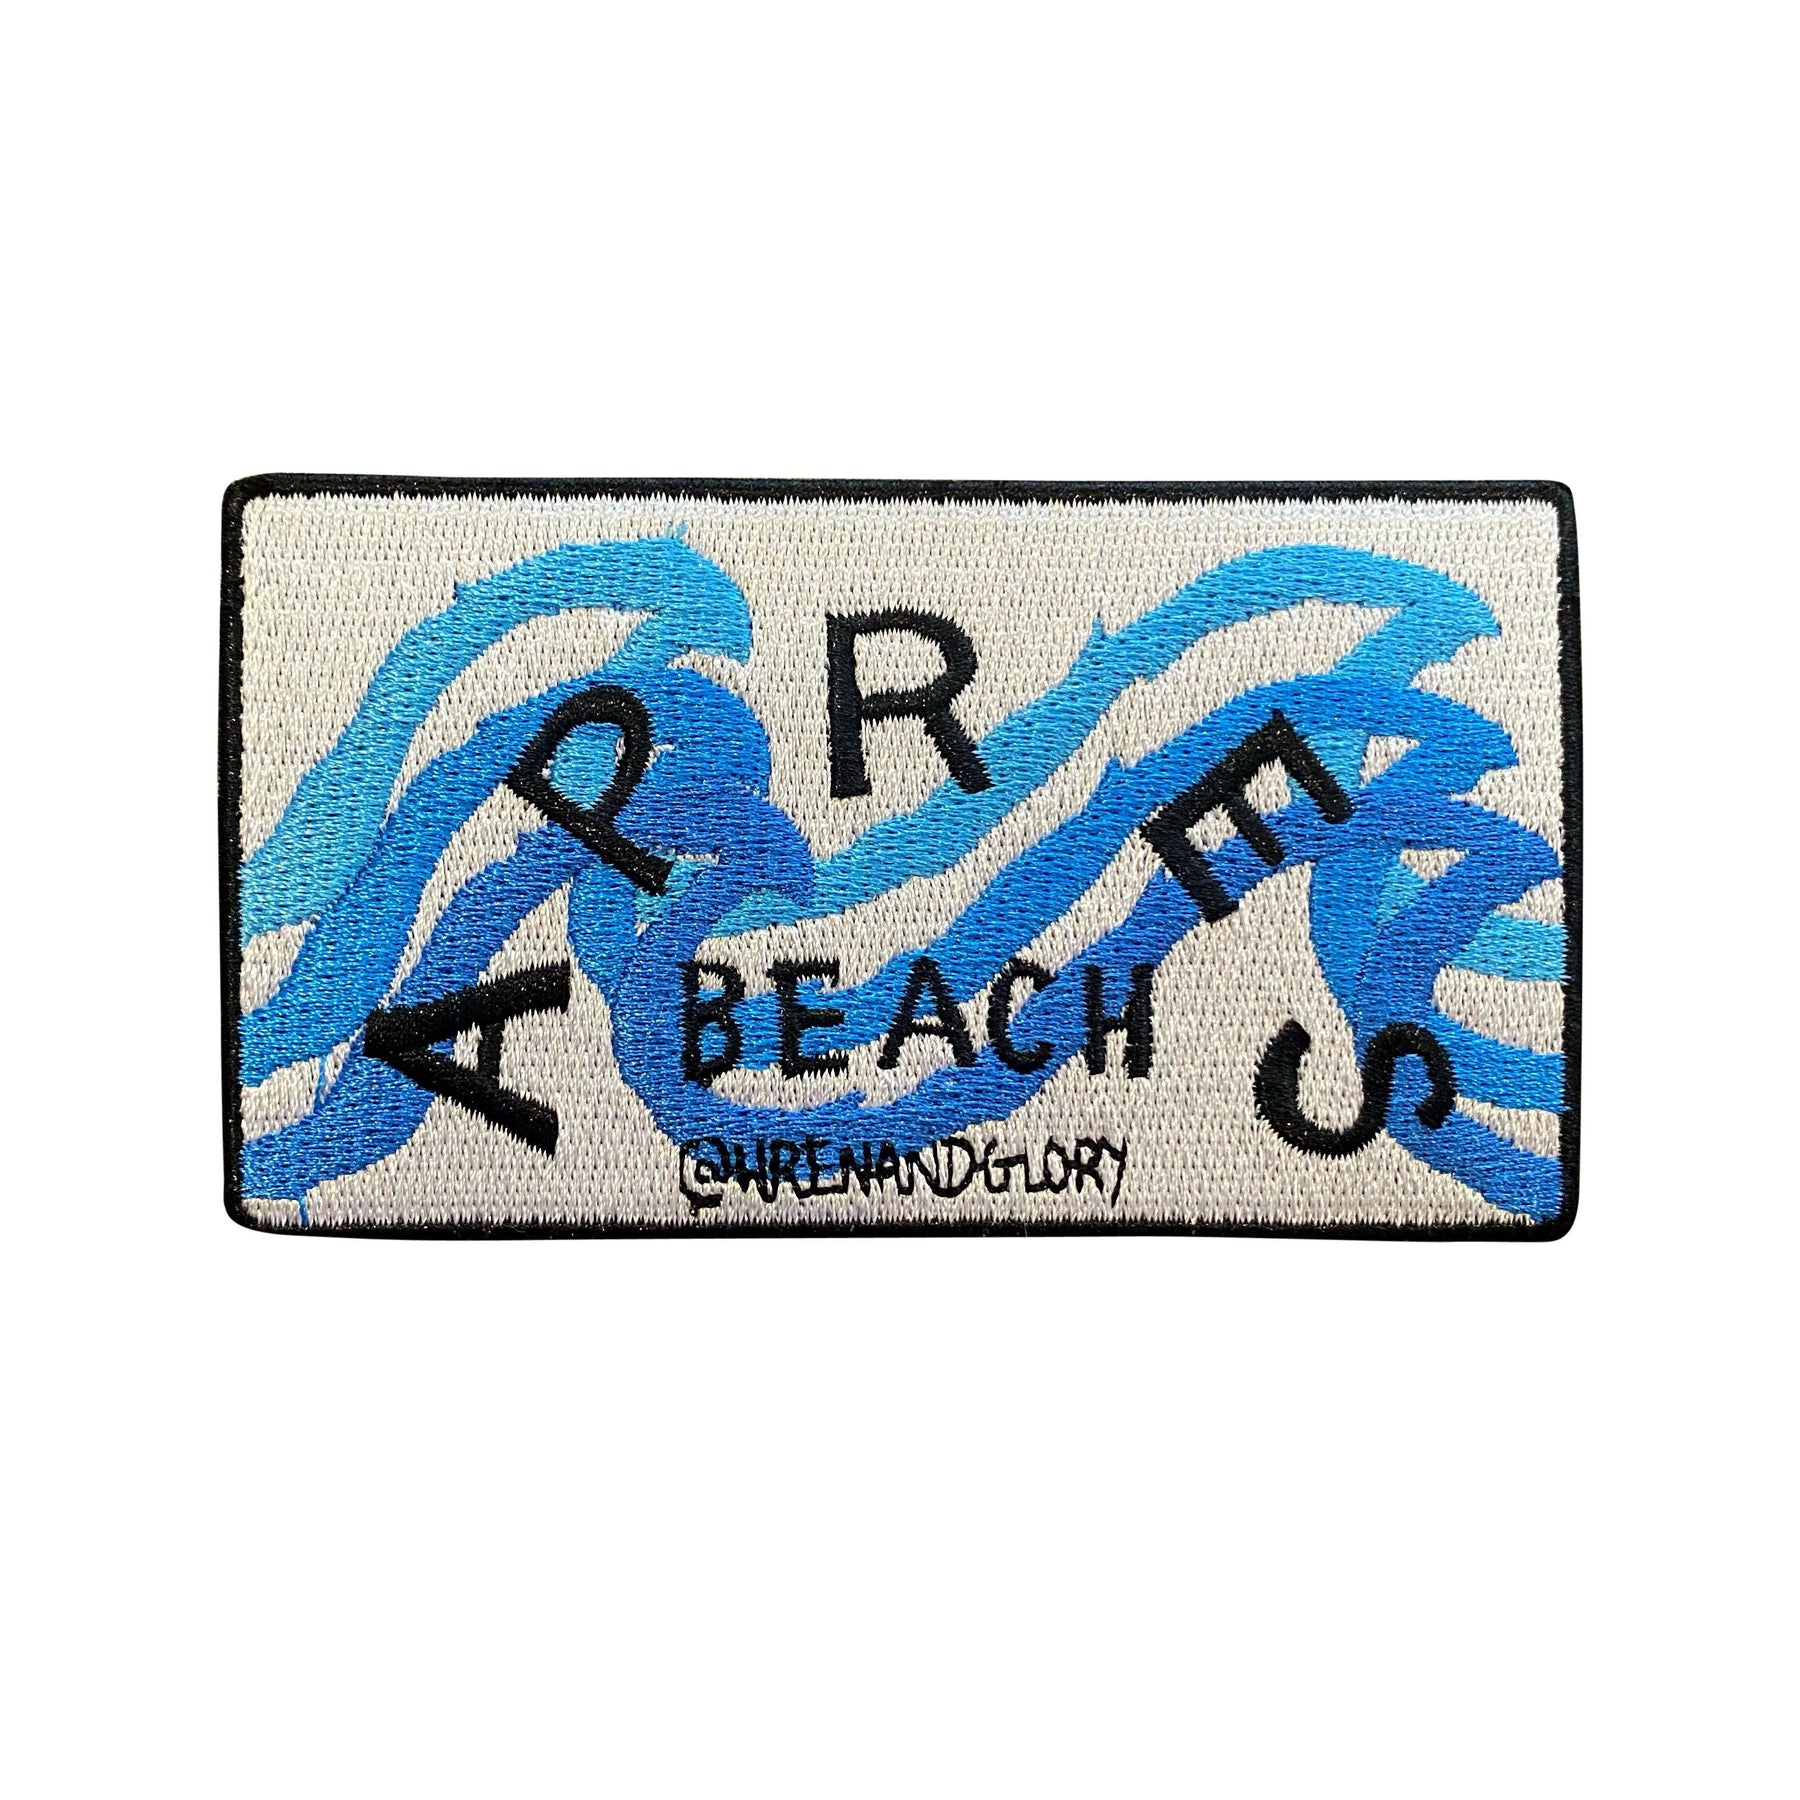 APRES BEACH' EMBROIDERED PATCH